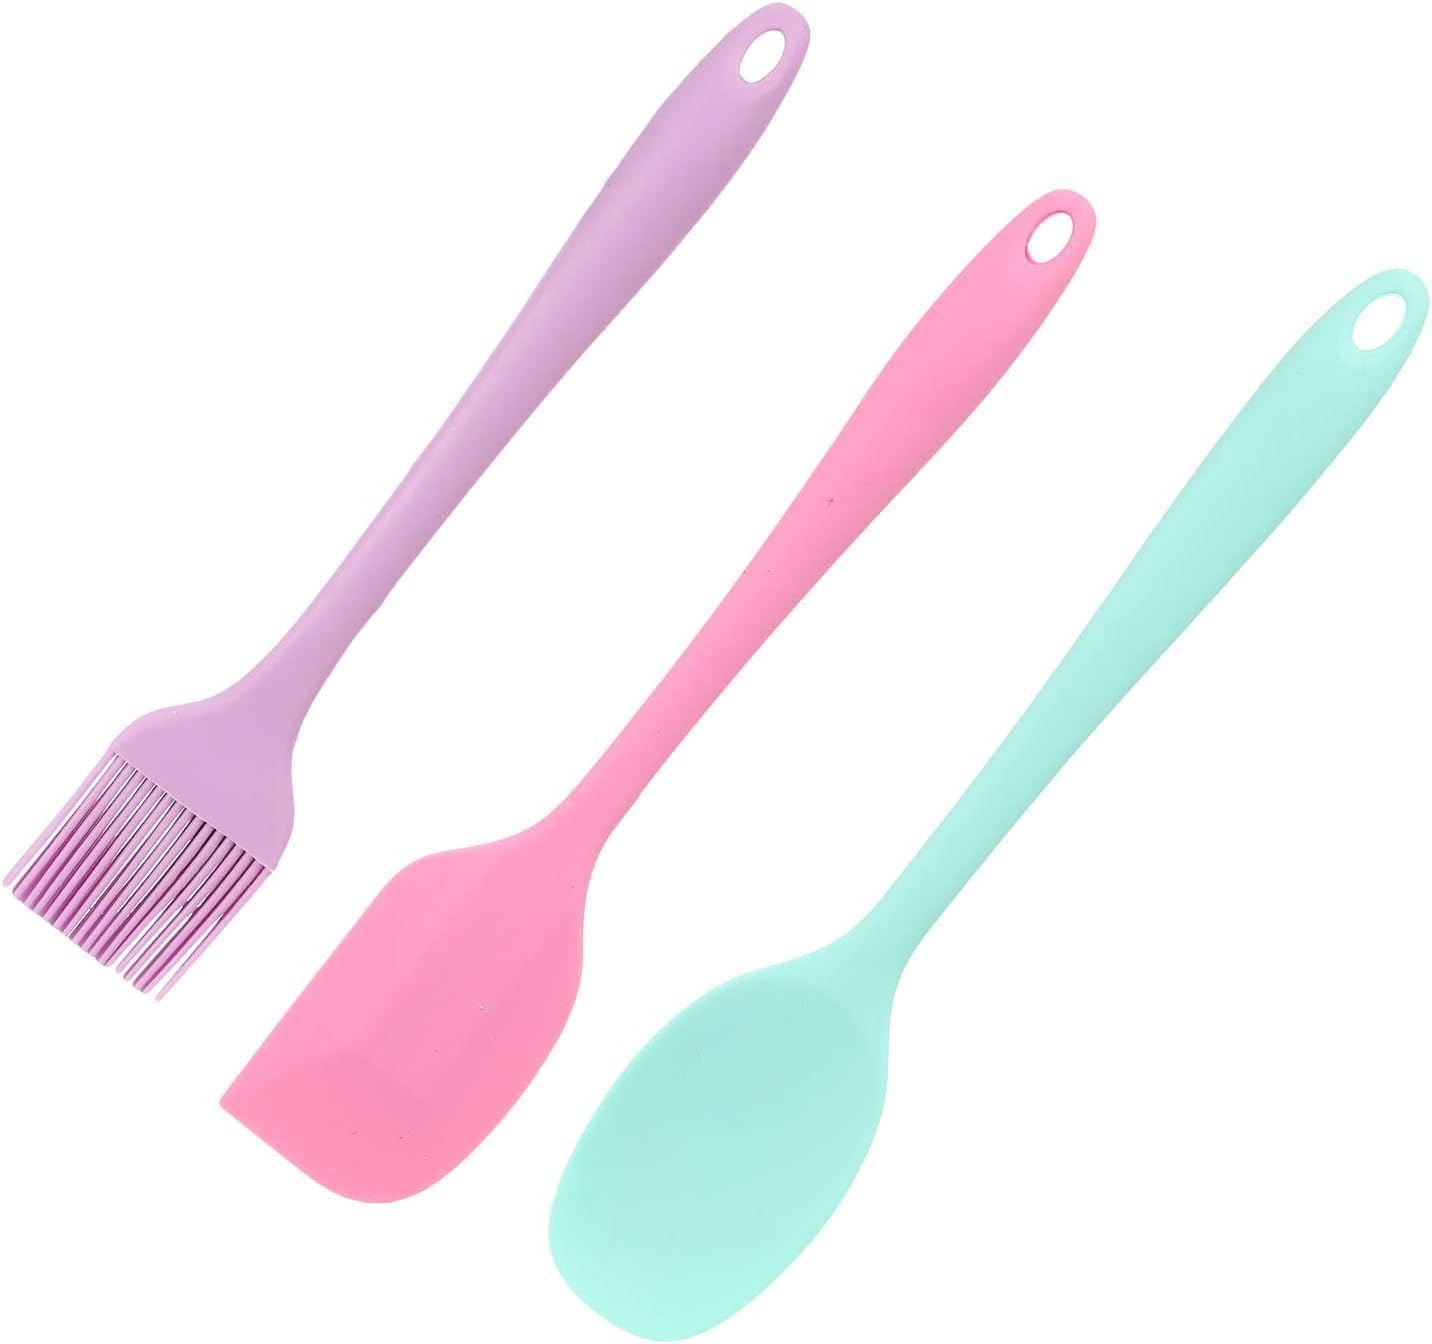 VIO Non-stick Silicone Kitchenware Cooking Tool Set, Flexible, Heat-Resistant, Easy-Clean Kitchen Rubber Spatula, Brush, Spoon (Assorted Colors) (Lavender-Pink-Blue)